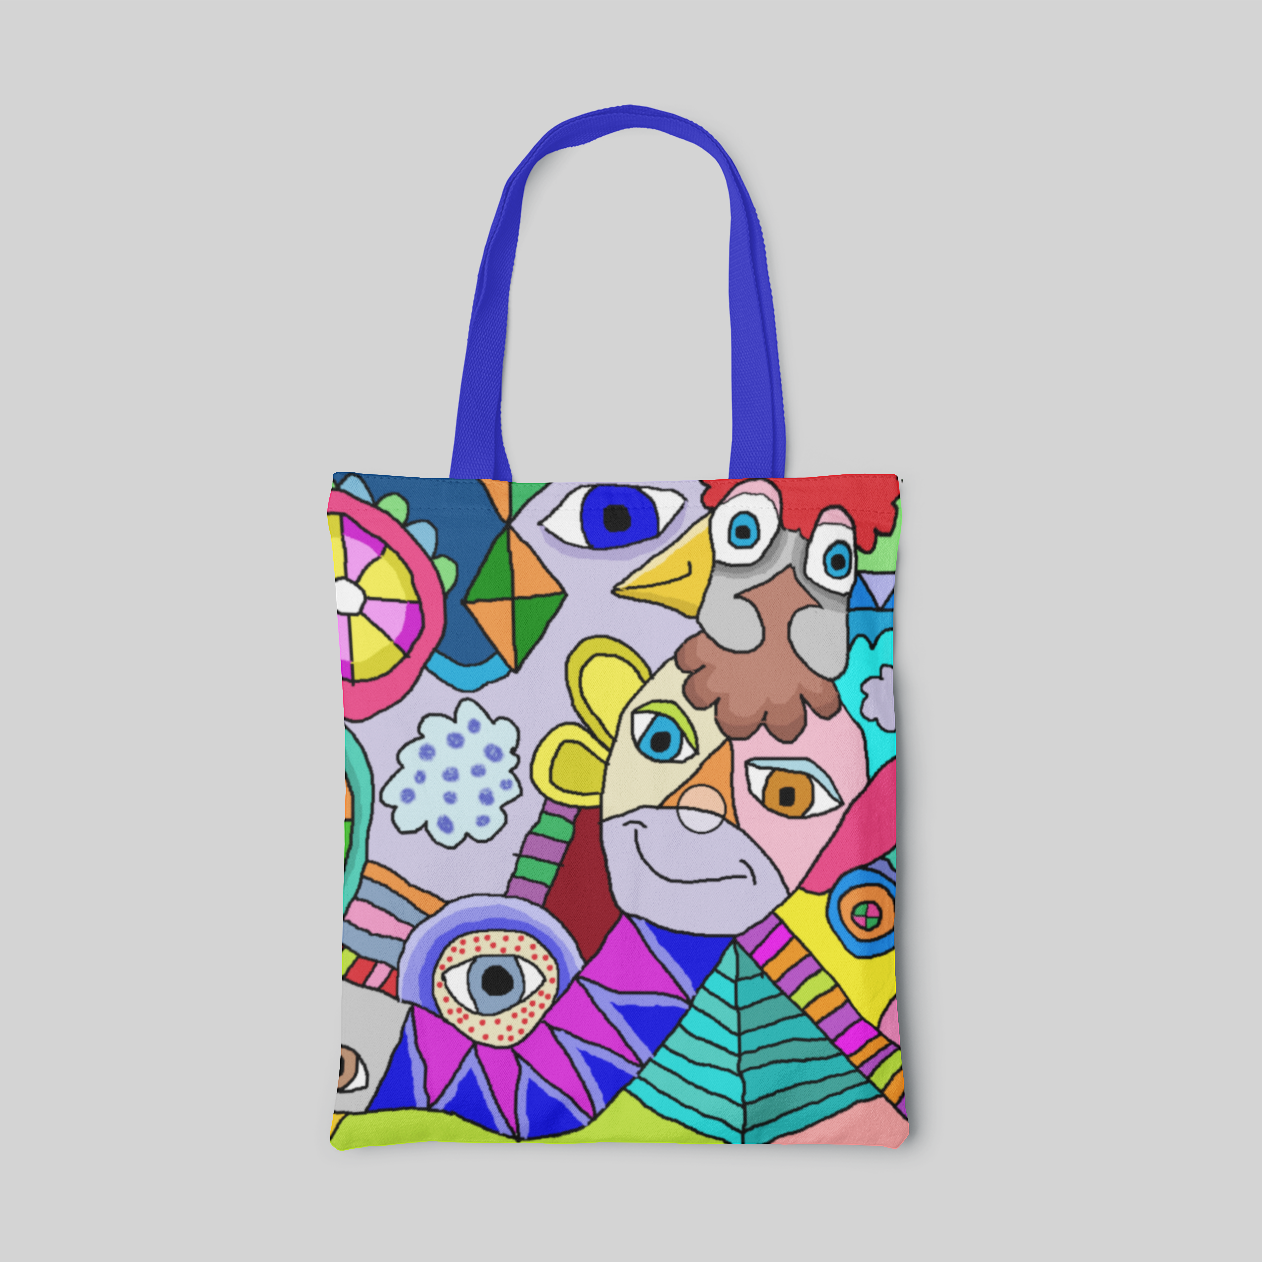 Abstract monkey illustration with bold colours and multiple eyes on tote bag 